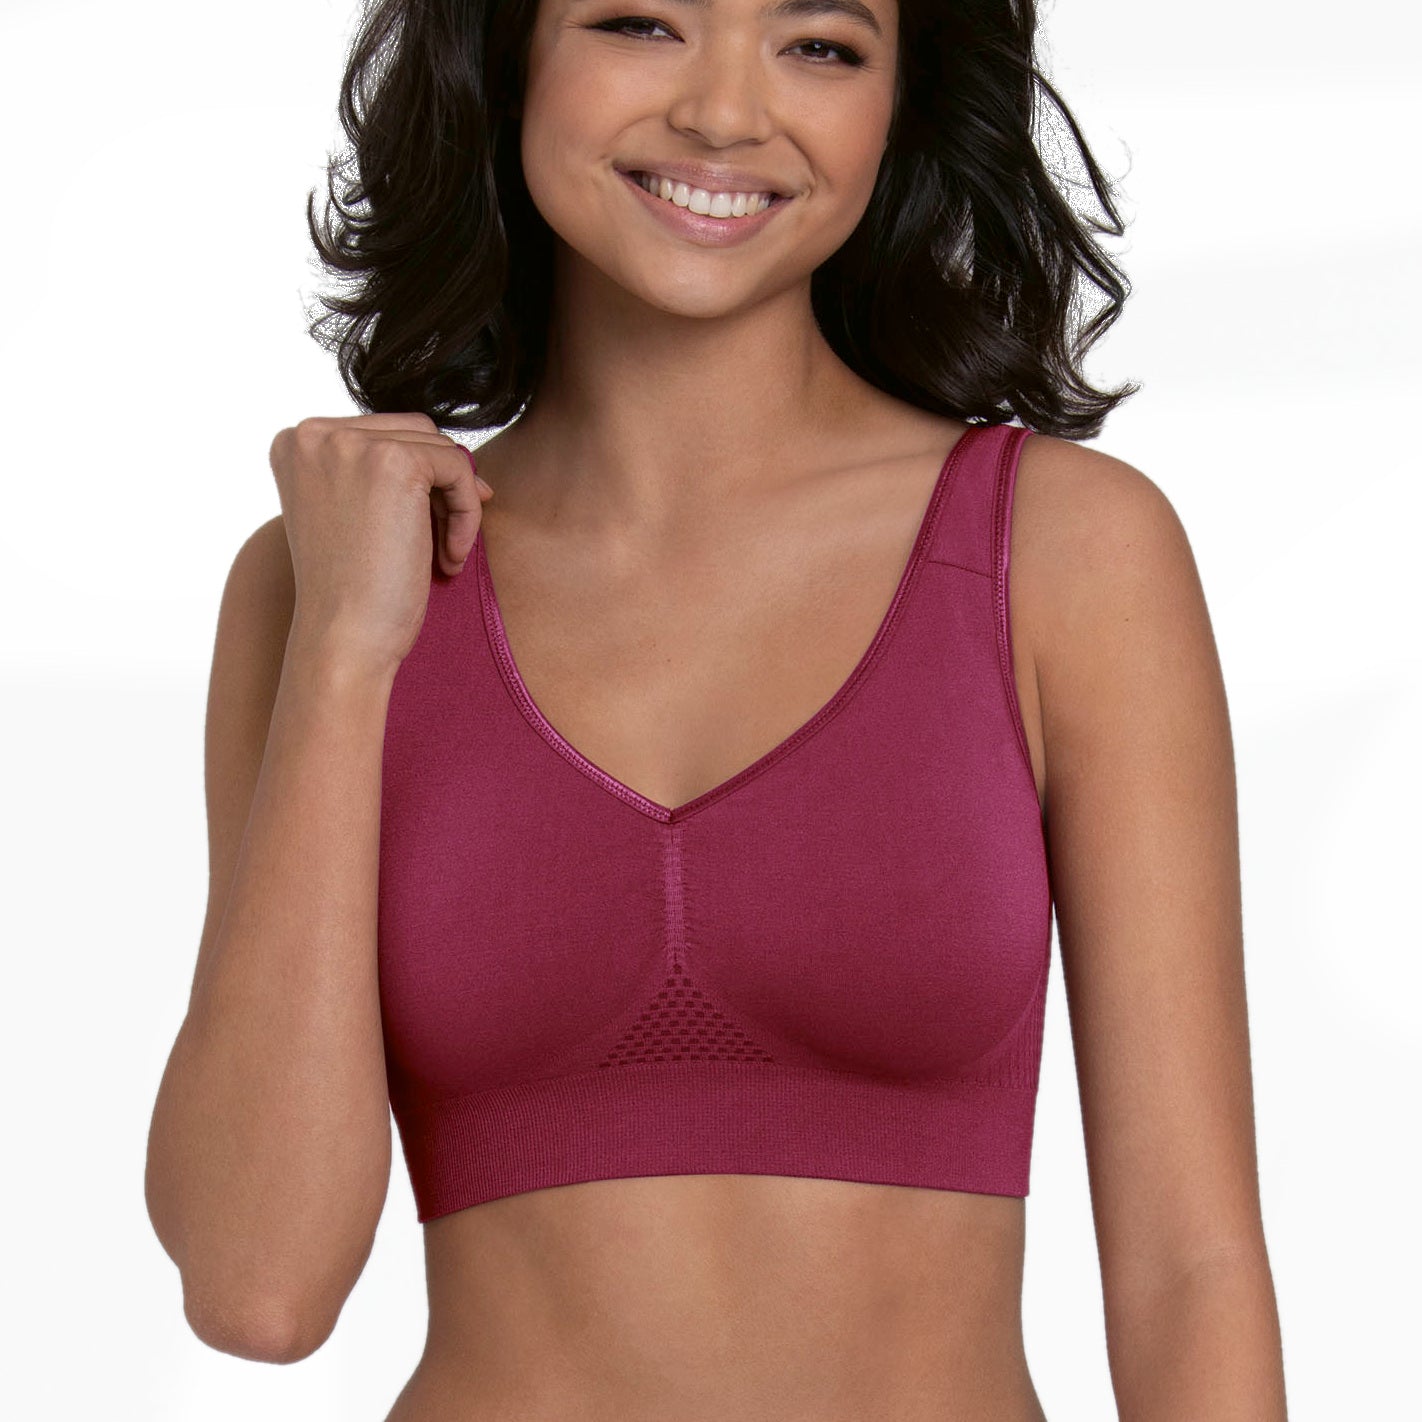 Silicone Breast Pocket Bra for Women Mastectomy Plus Size 70-100ABC Cup  Tube Top Bras Underwear Soft Cotton Lining (Color : Skin, Size : XL/X-Large)